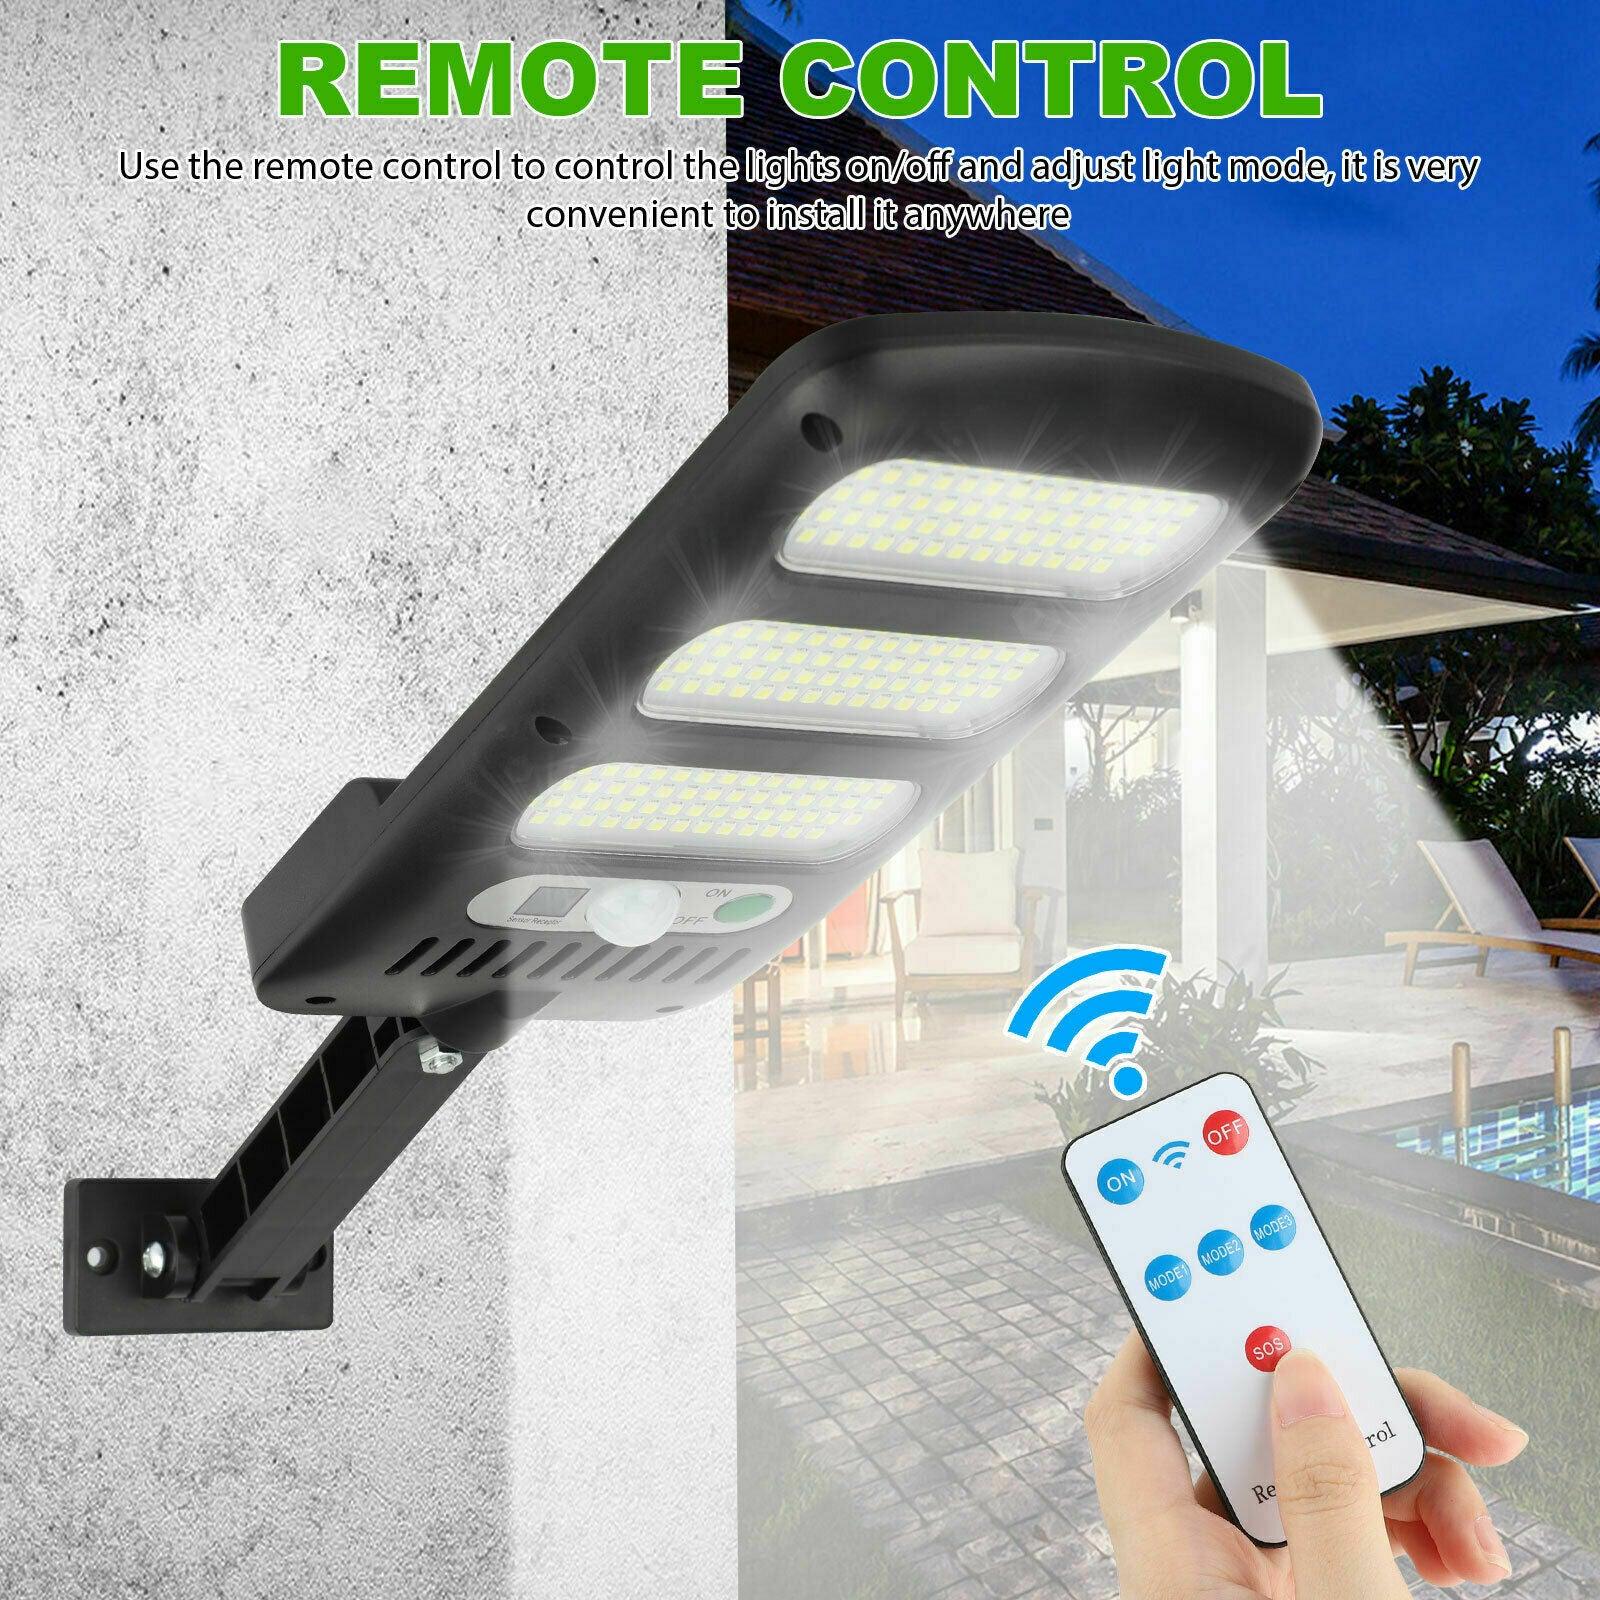 213 LED Outdoor Solar Street Wall Light Sensor PIR Motion LED Lamp Remote Control - Etyn Online {{ product_tag }}